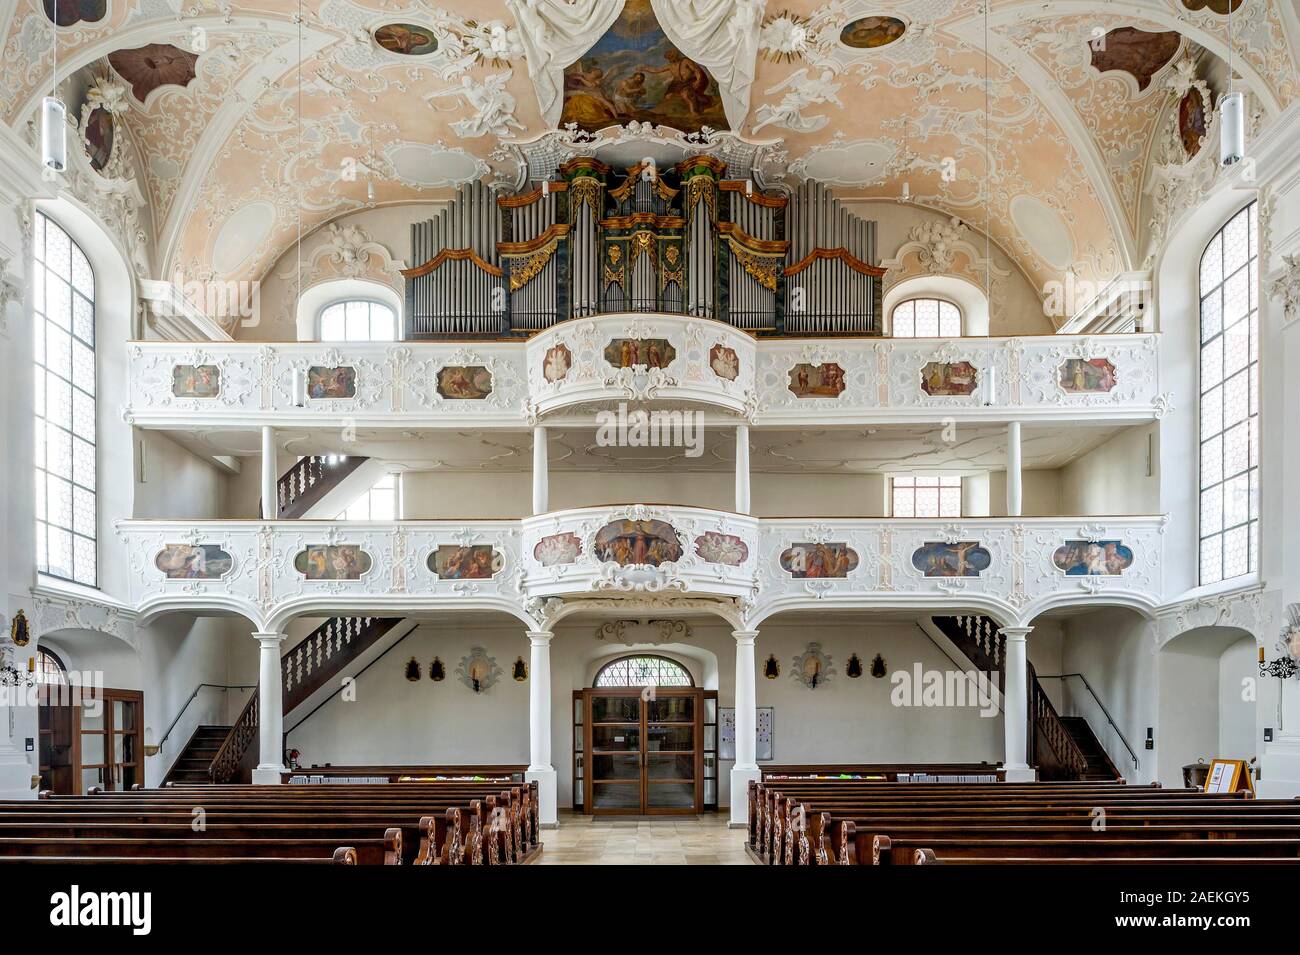 Baroque nave with organ gallery, St. John the Baptist parish church, old town, Hilpoltstein, Middle Franconia, Franconia, Bavaria, Germany Stock Photo